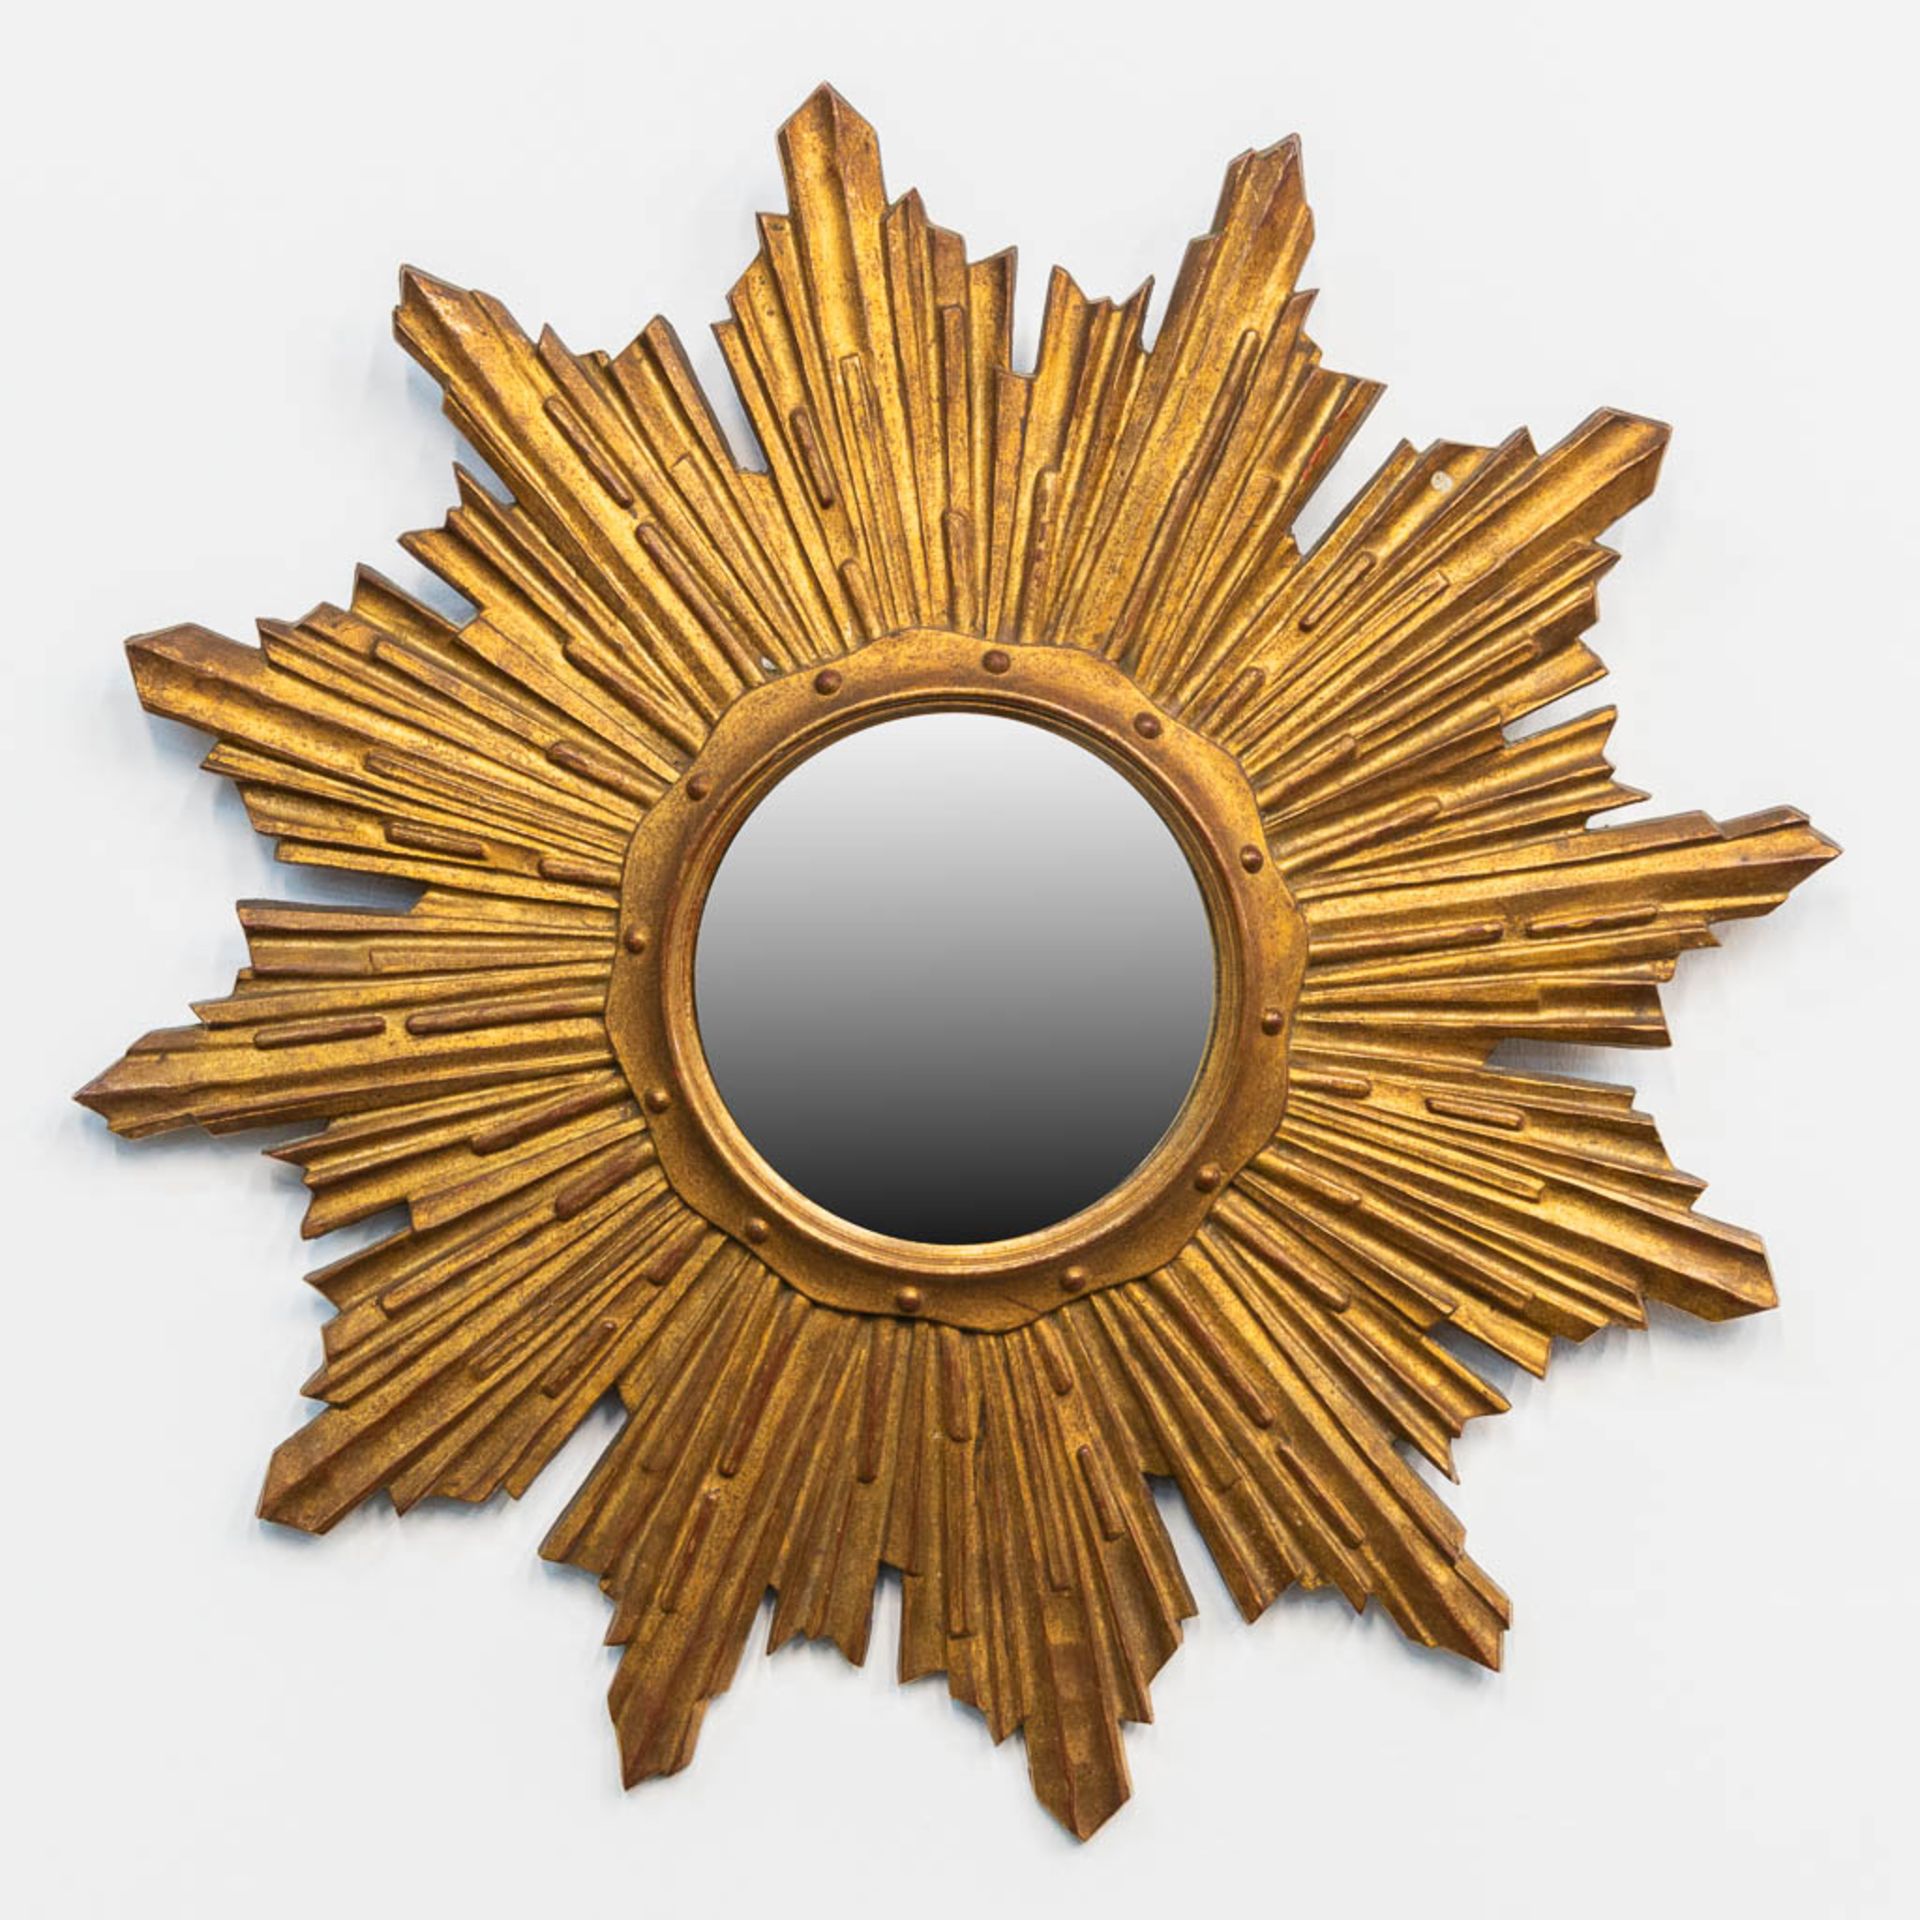 A collection of 2 sunburst mirrors, made of wood, 1960's. - Image 3 of 12